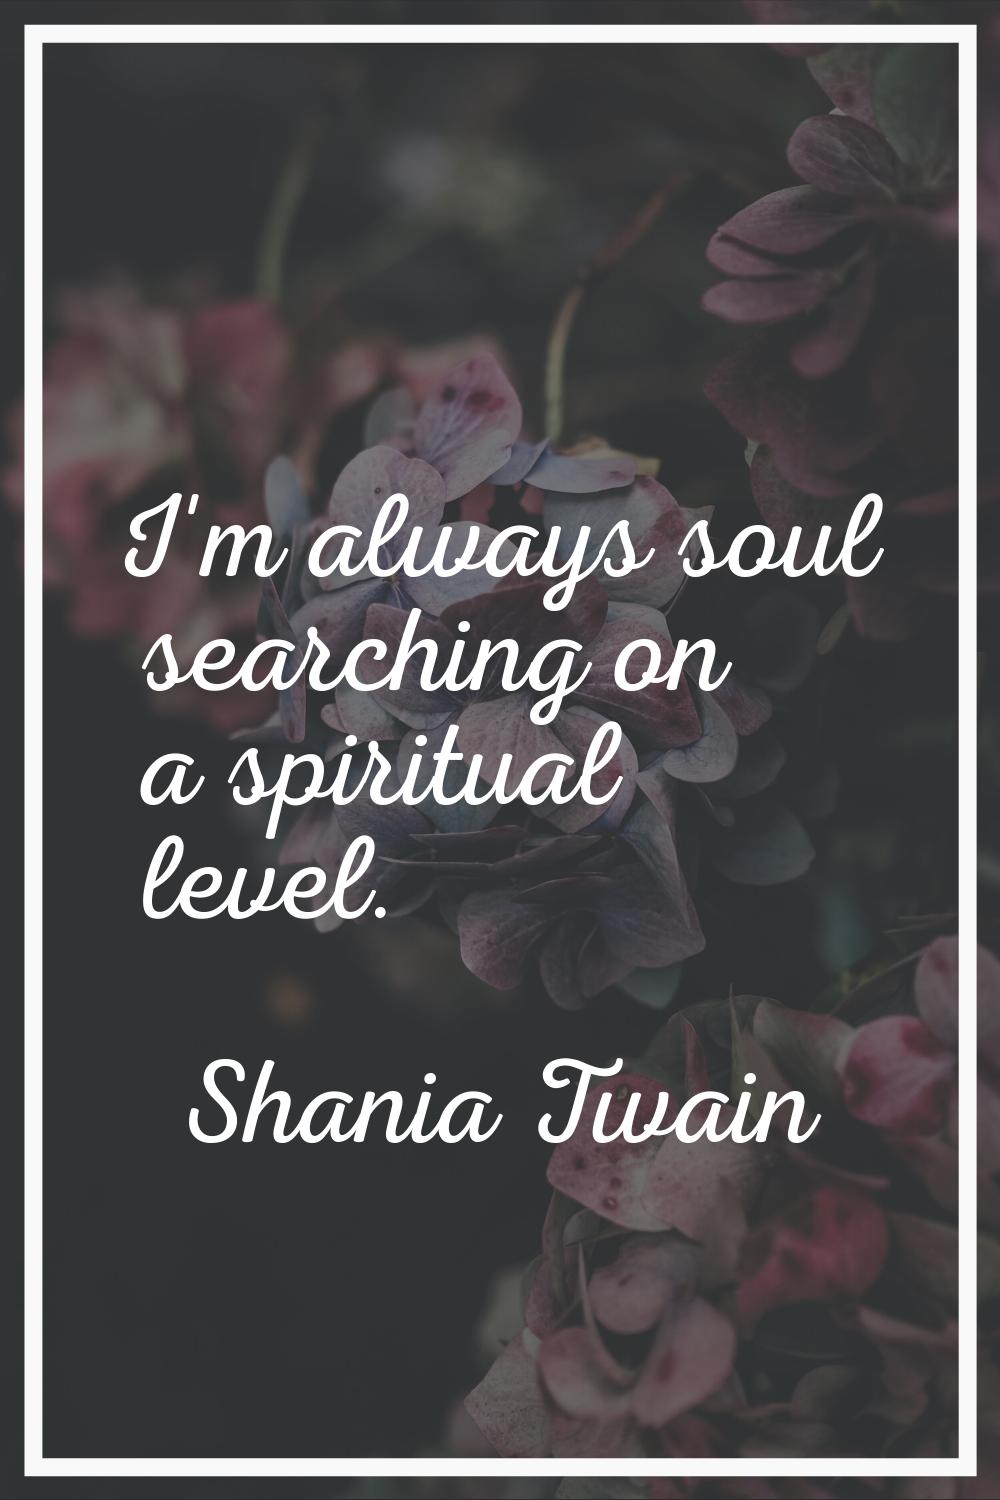 I'm always soul searching on a spiritual level.